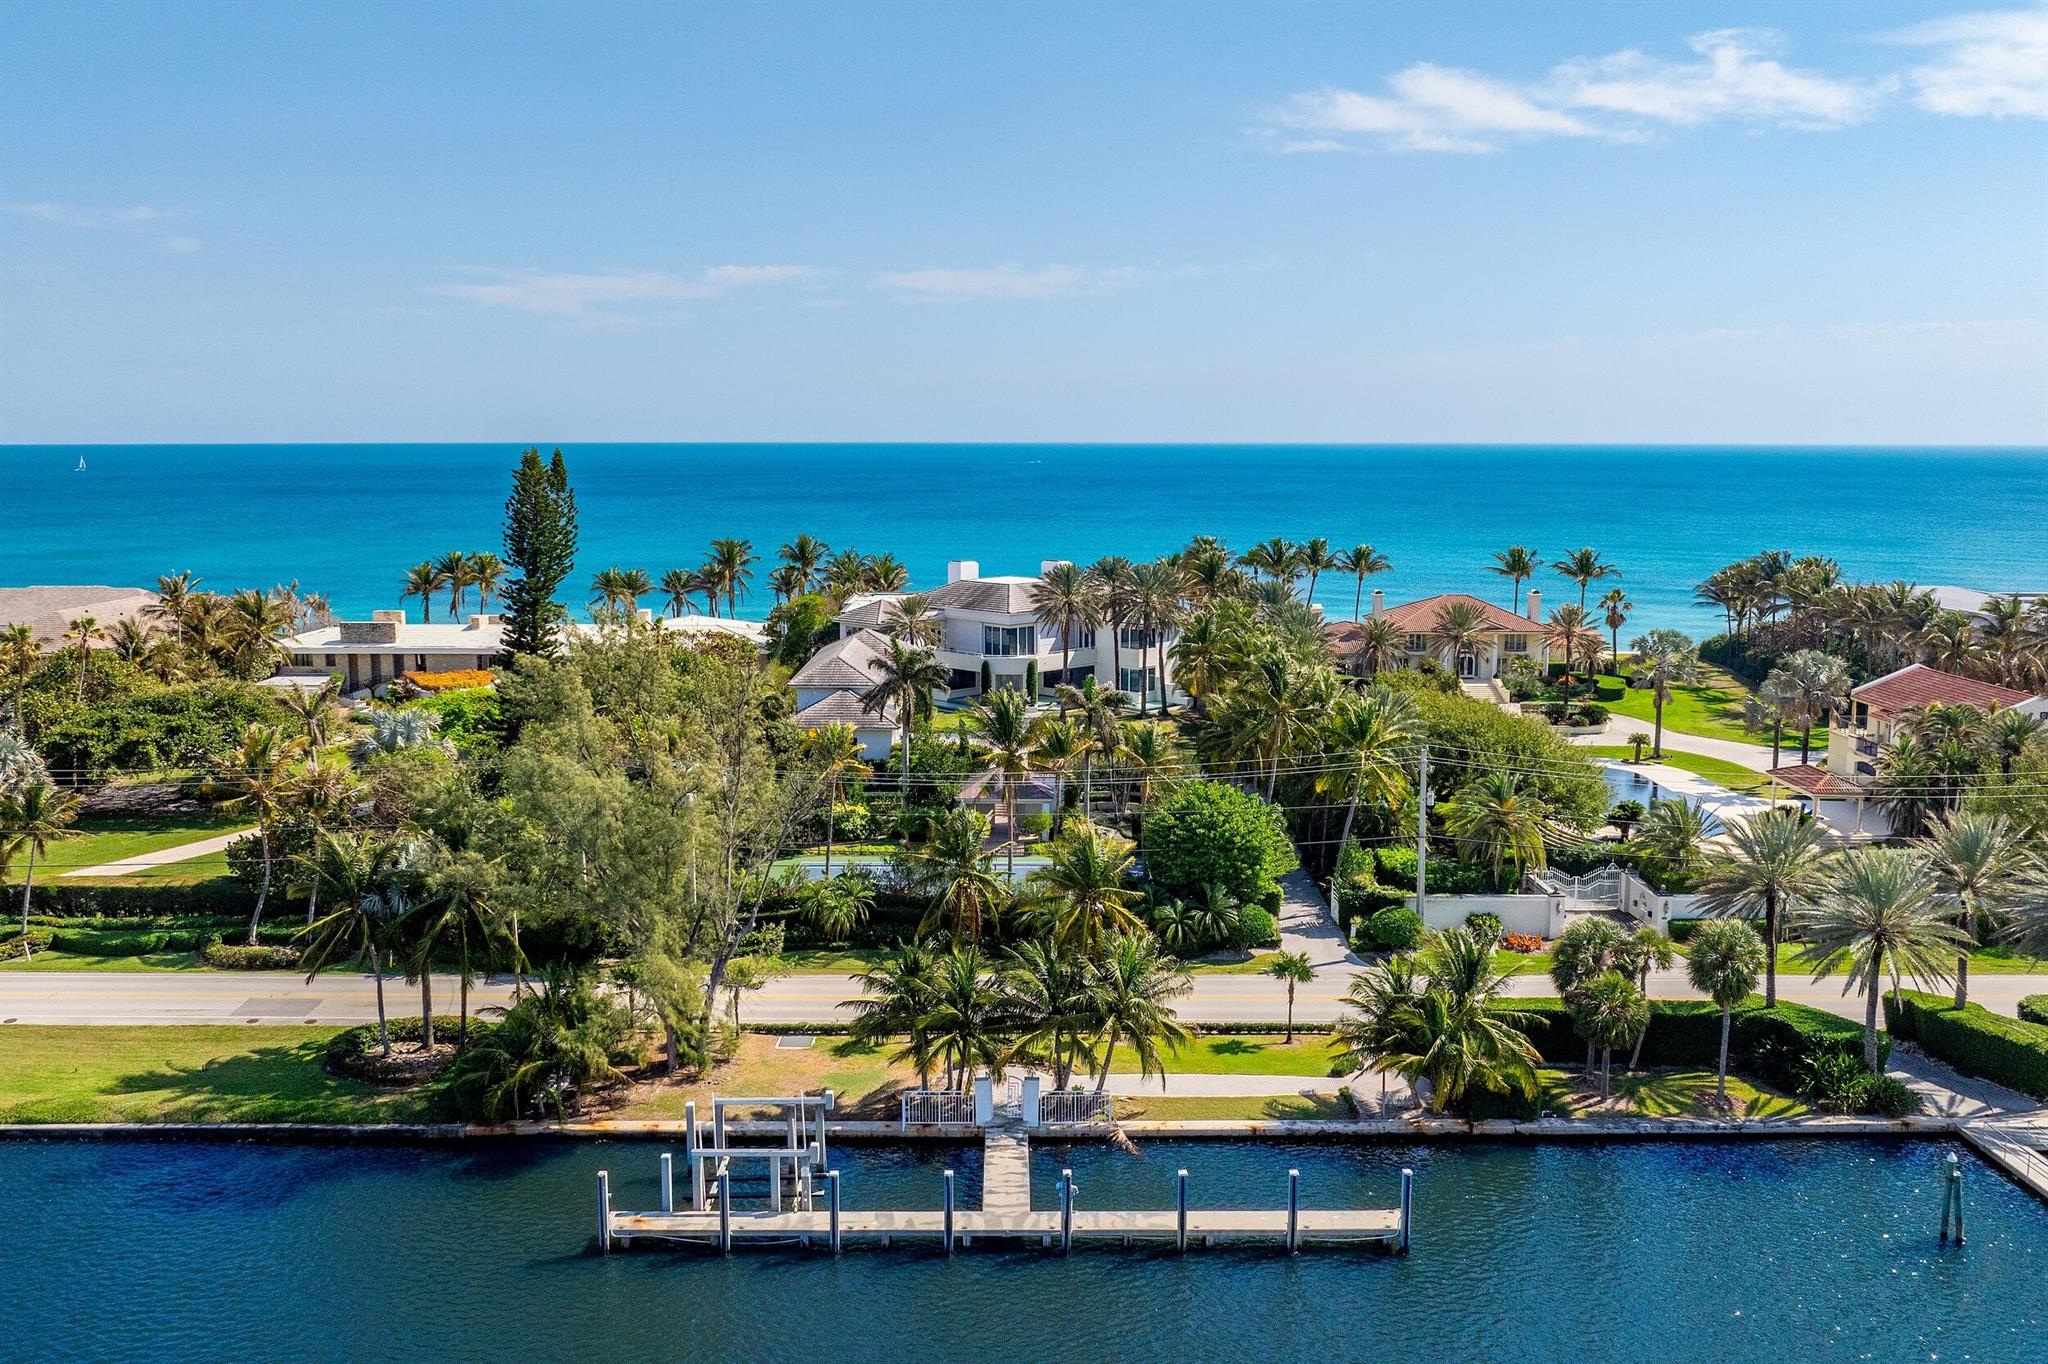 Spectacular Ocean-to-Lake estate with 7 bedrooms, 8 bathrooms and 3 half baths. Highlights include tennis court, boat dock, and oceanfront pool and spa. Light and bright interior living spaces with floor to ceiling windows. Commanding views of the Atlantic Ocean and the Intracoastal Waterway.